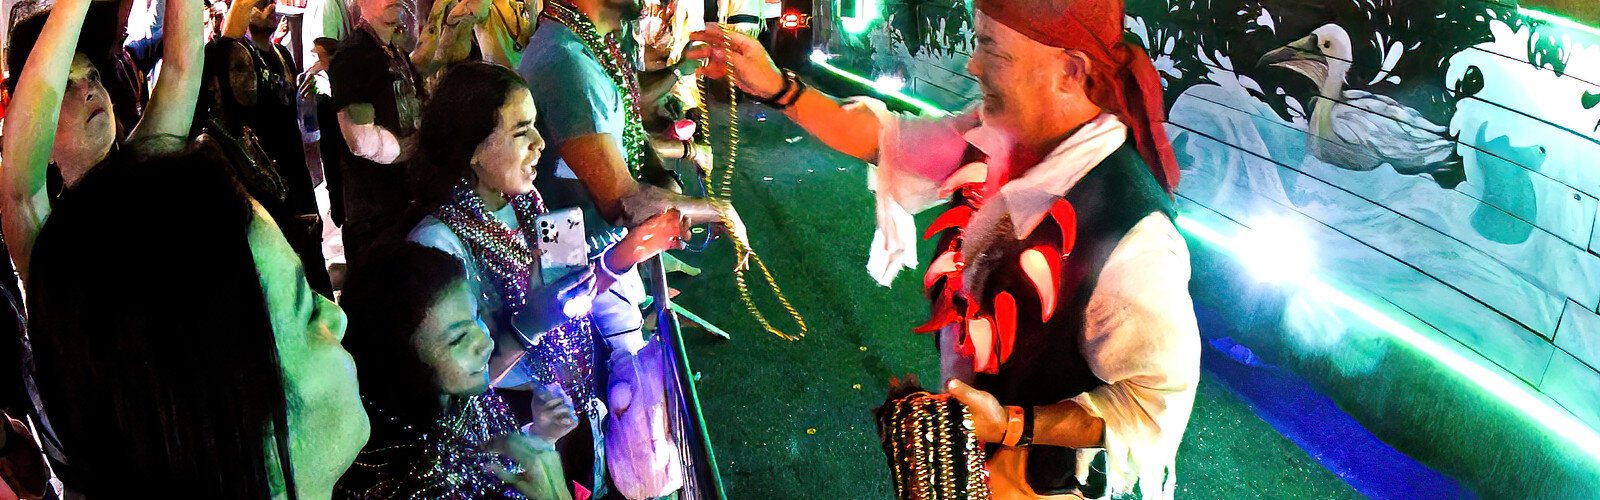  A Castaways Krewe member hands out beads to a young girl, happy to add to her growing bounty.